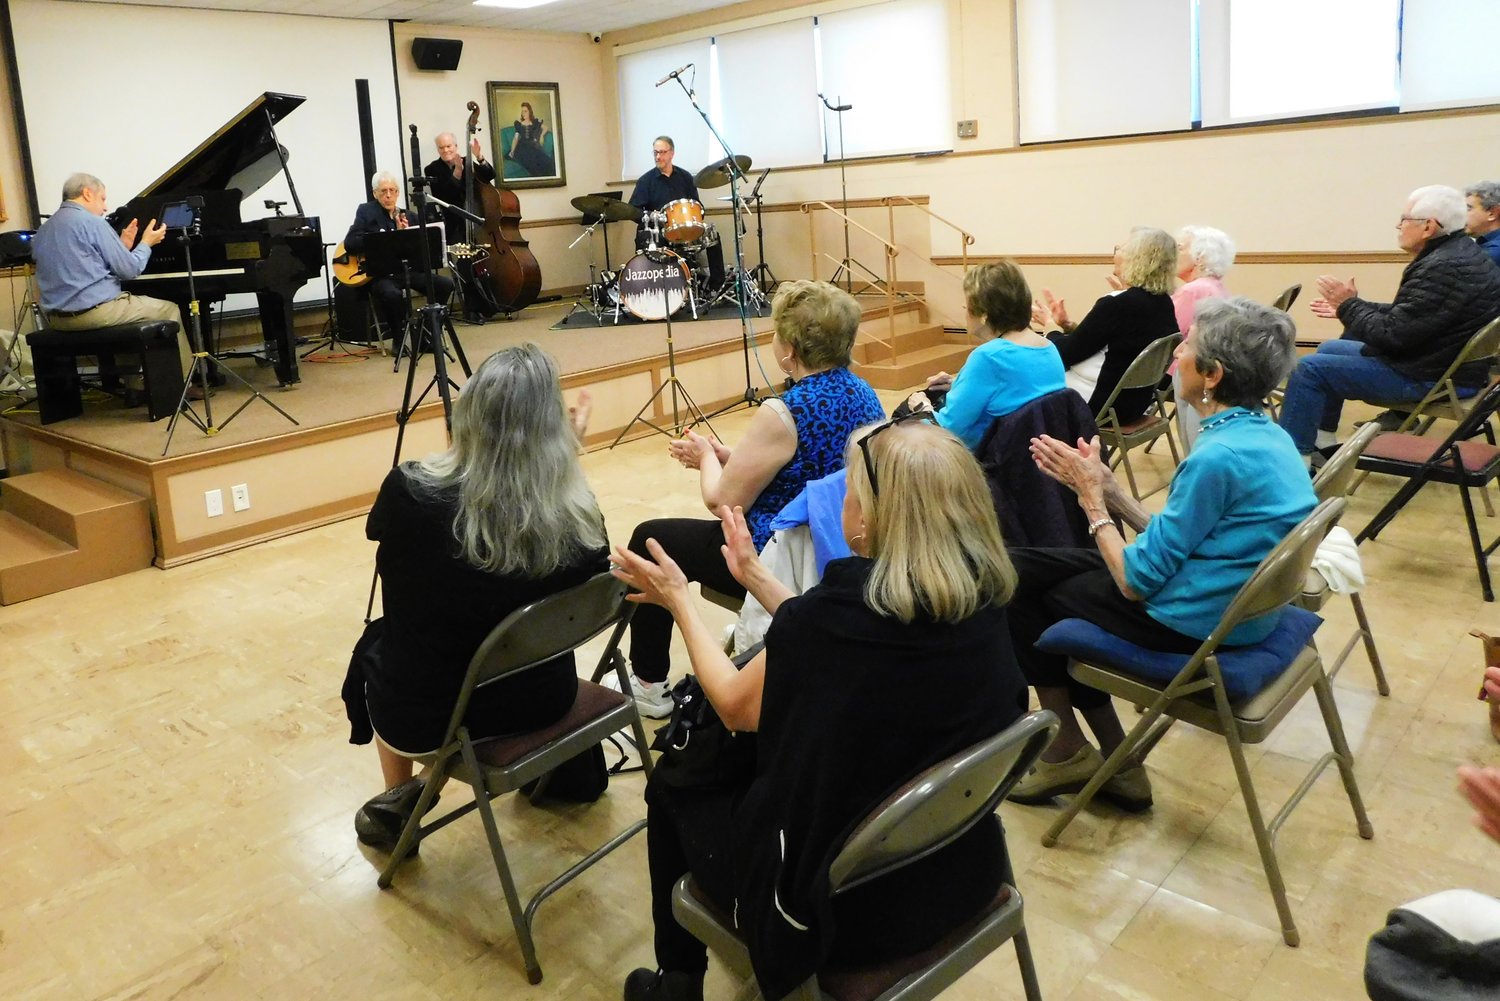 Jazzopedia fans clapped along with pianist Allen Morrison, guitarist Marc Rosen, bass player Edgar Mills, and drummer Brad Sporkin during a Jazzopedia concert at the Freeport Memorial Library on May 1.